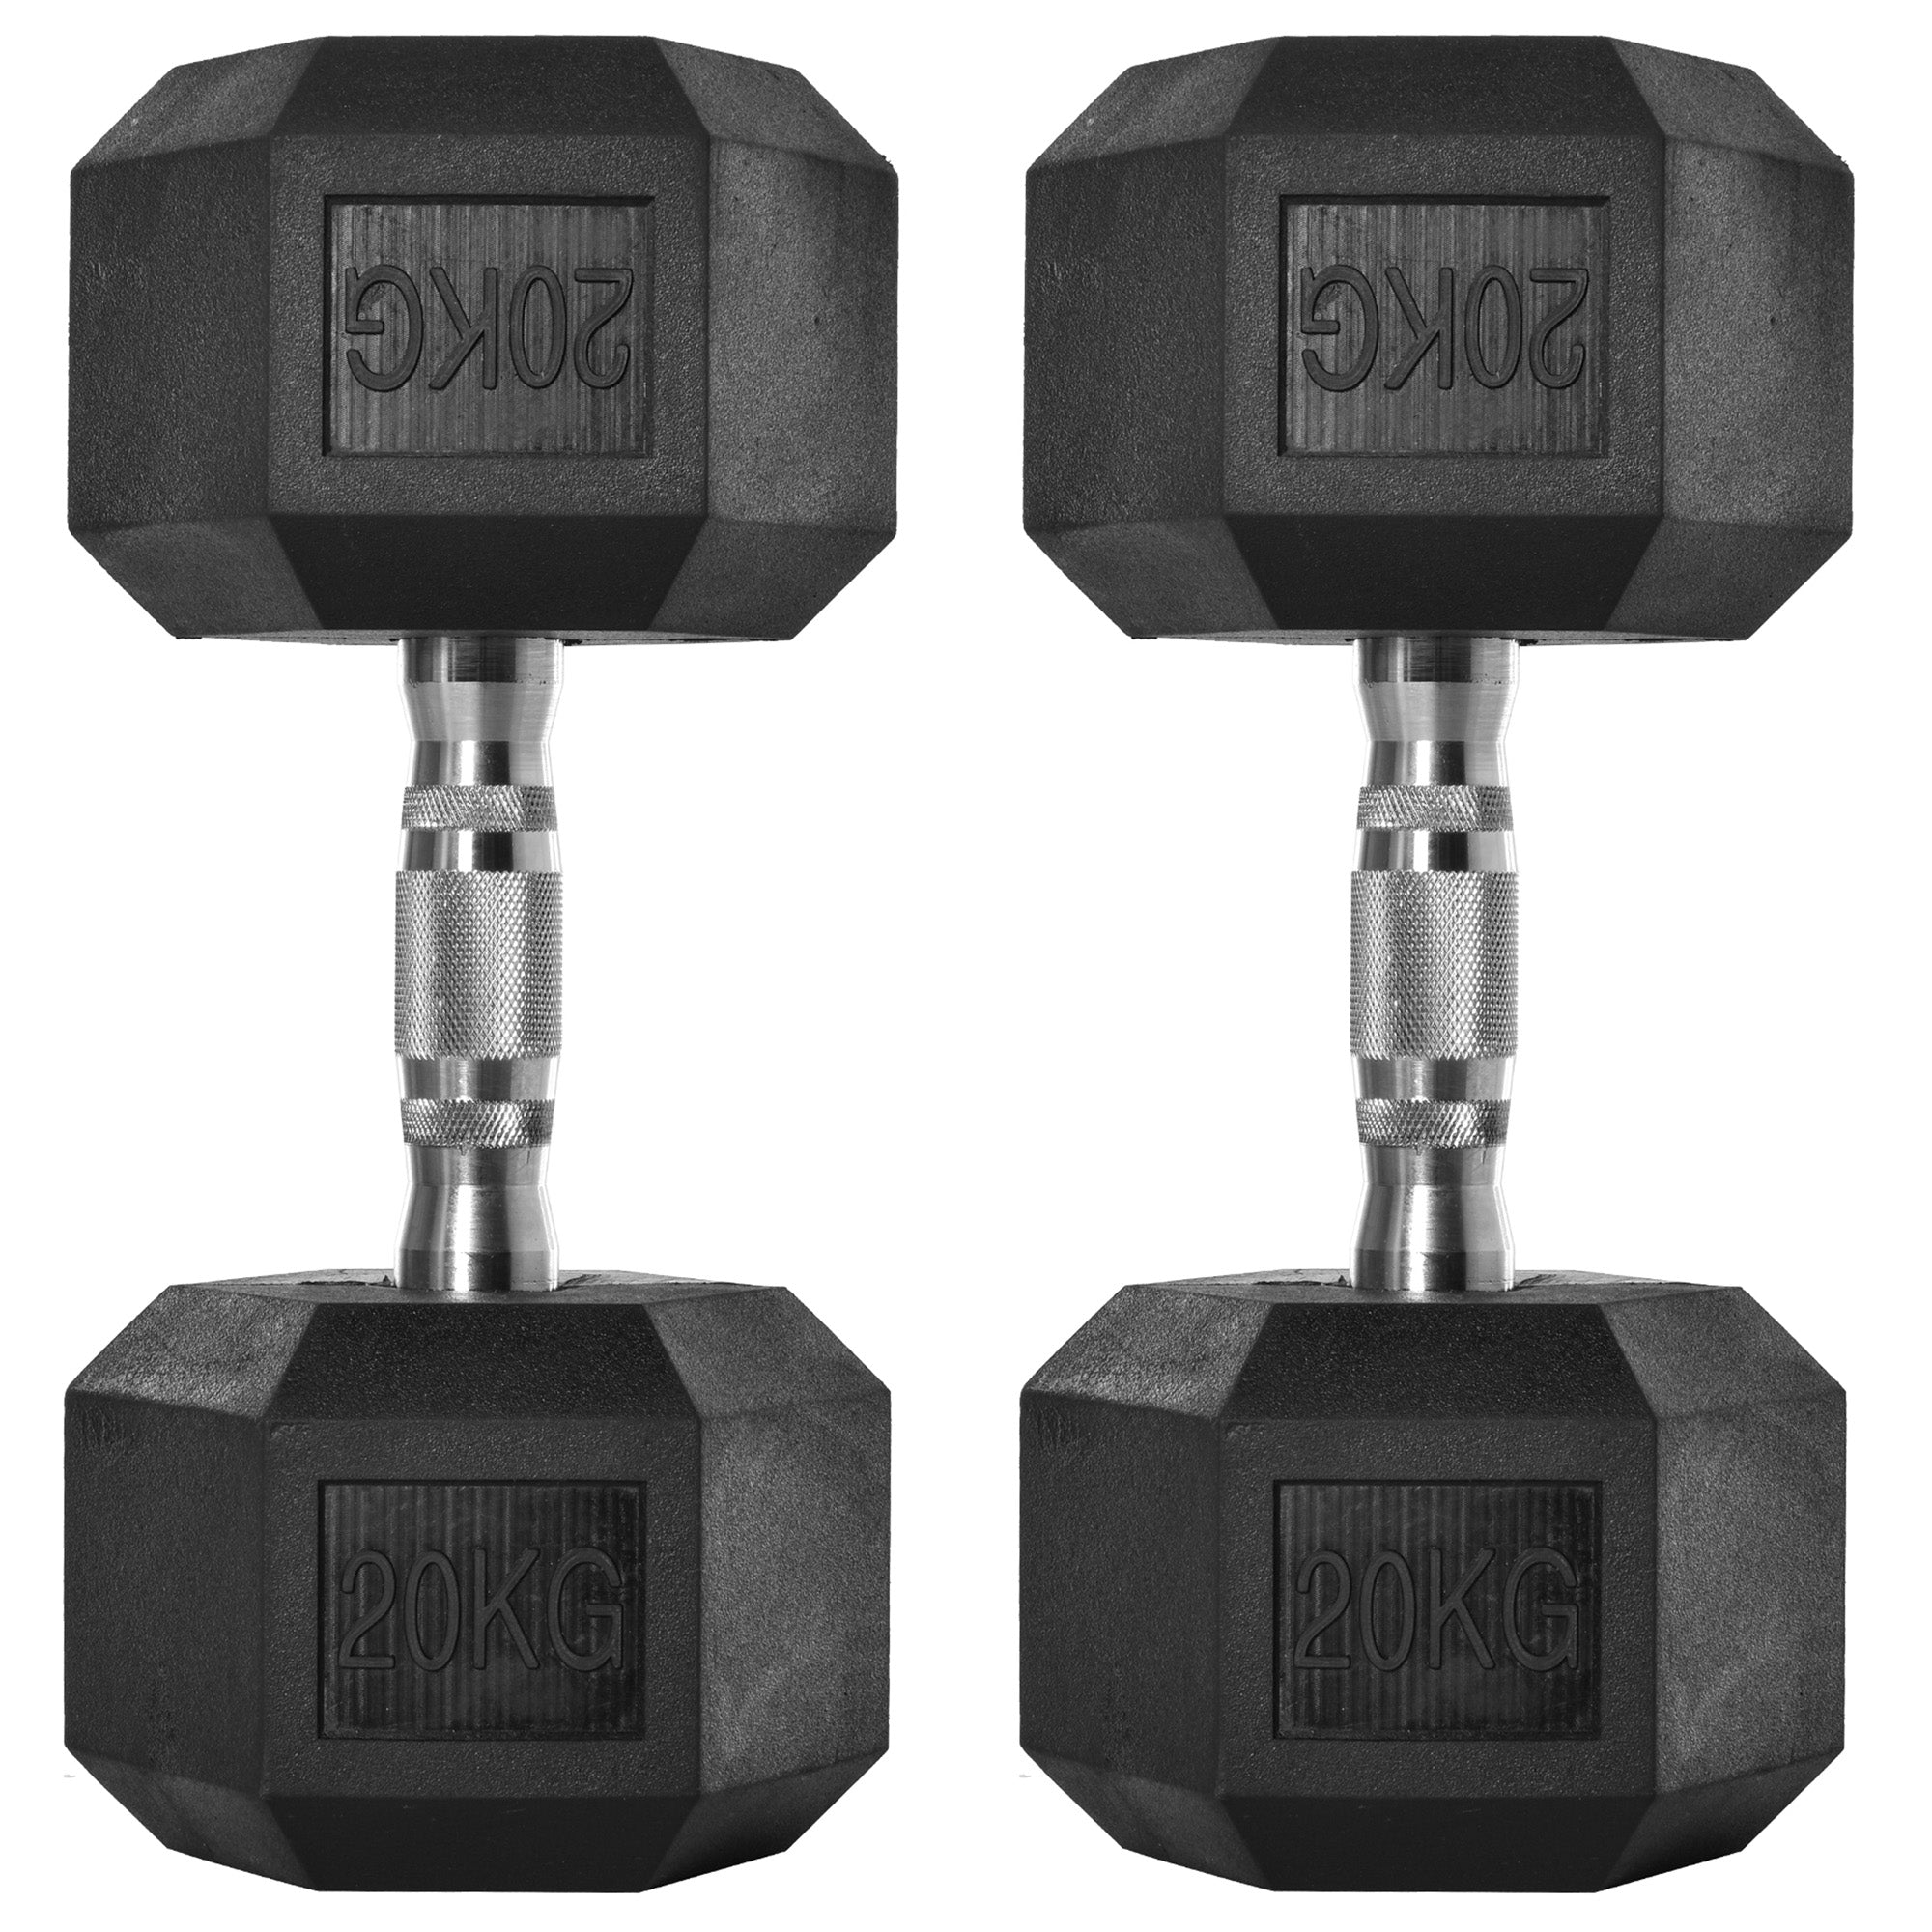 2x20kg Rubber Hex Dumbbell Portable Hand Weights Dumbbell Home Gym Workout Fitness Hand Dumbbell-0